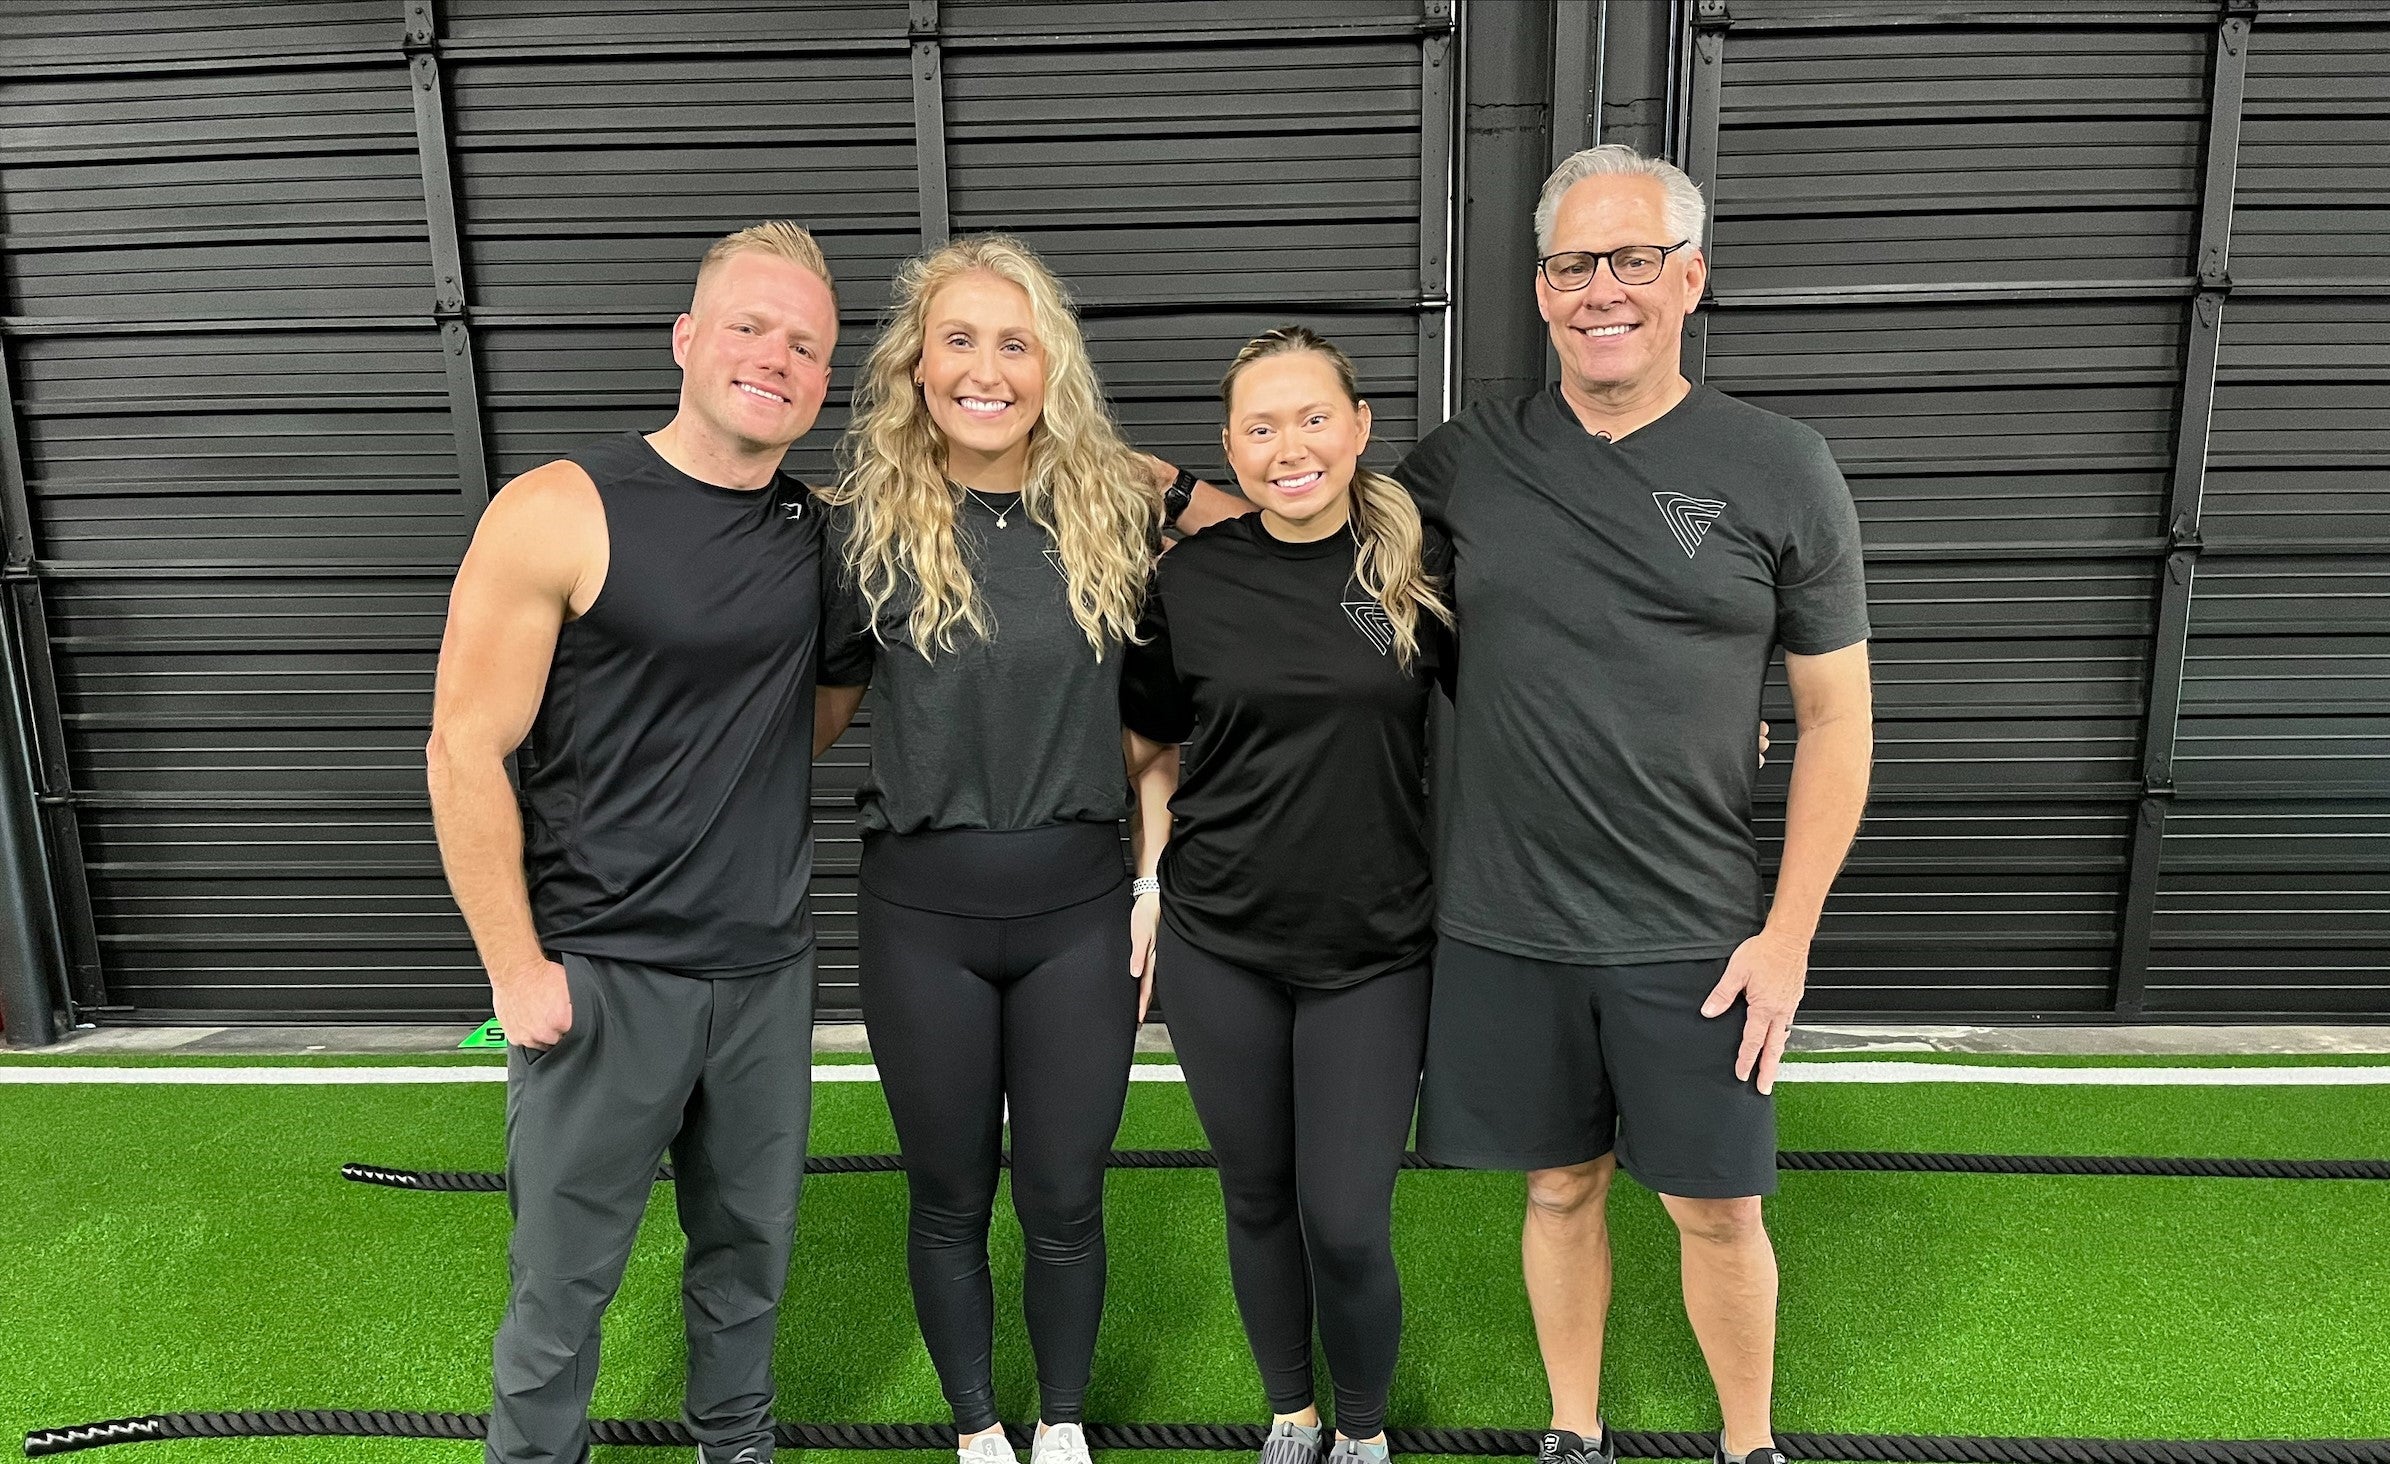 Dr. Frank Gaffney fuses family, fitness with functional exercise